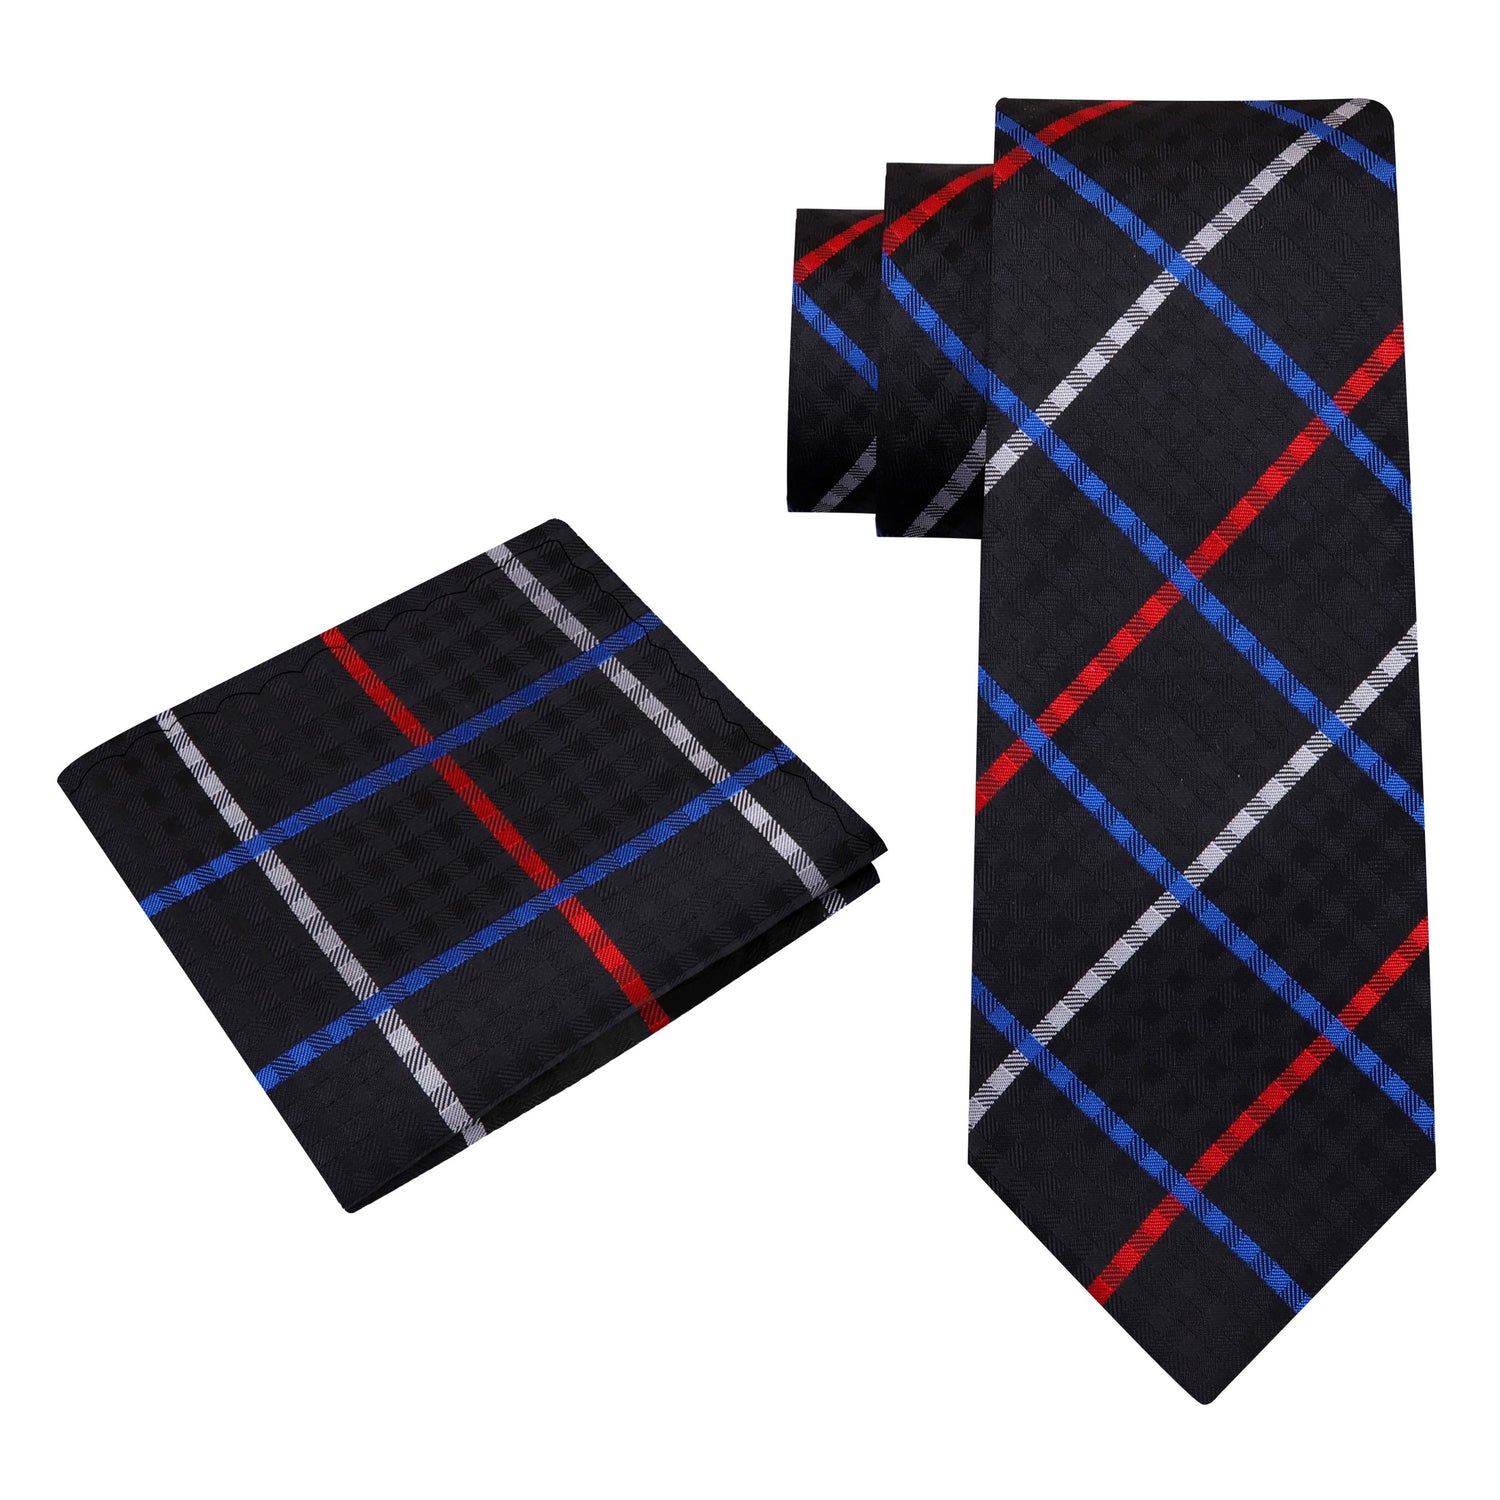 Alt view: A Black, White, Blue, Red With Geometric Diamond Pattern And Small Checks Pattern Silk Necktie With Matching Pocket Square